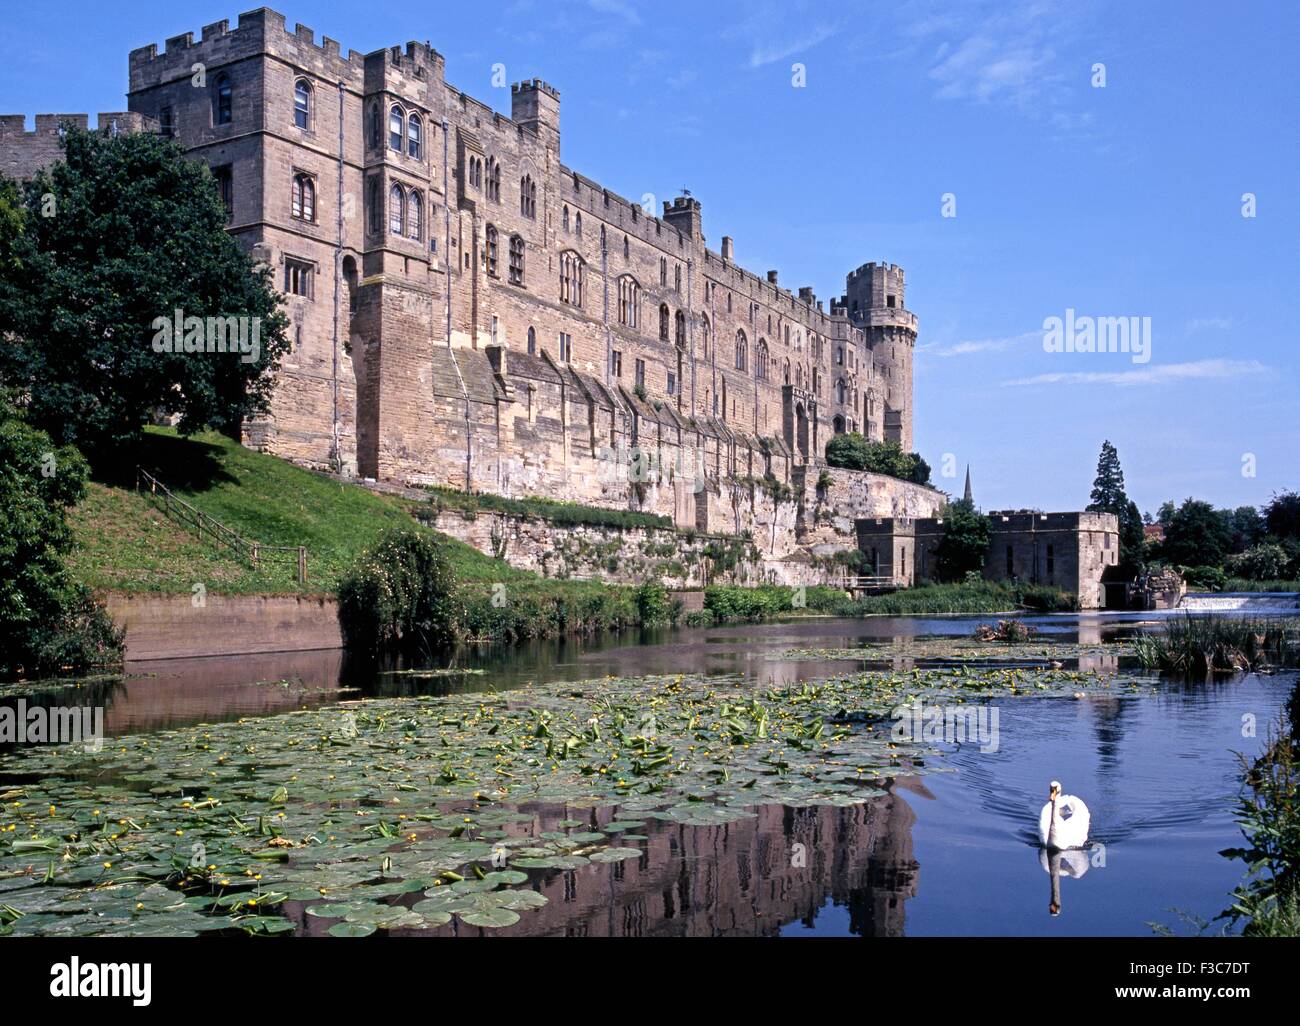 View of the Medieval castle alongside the River Avon, Warwick, Warwickshire, England, UK, Western Europe. Stock Photo